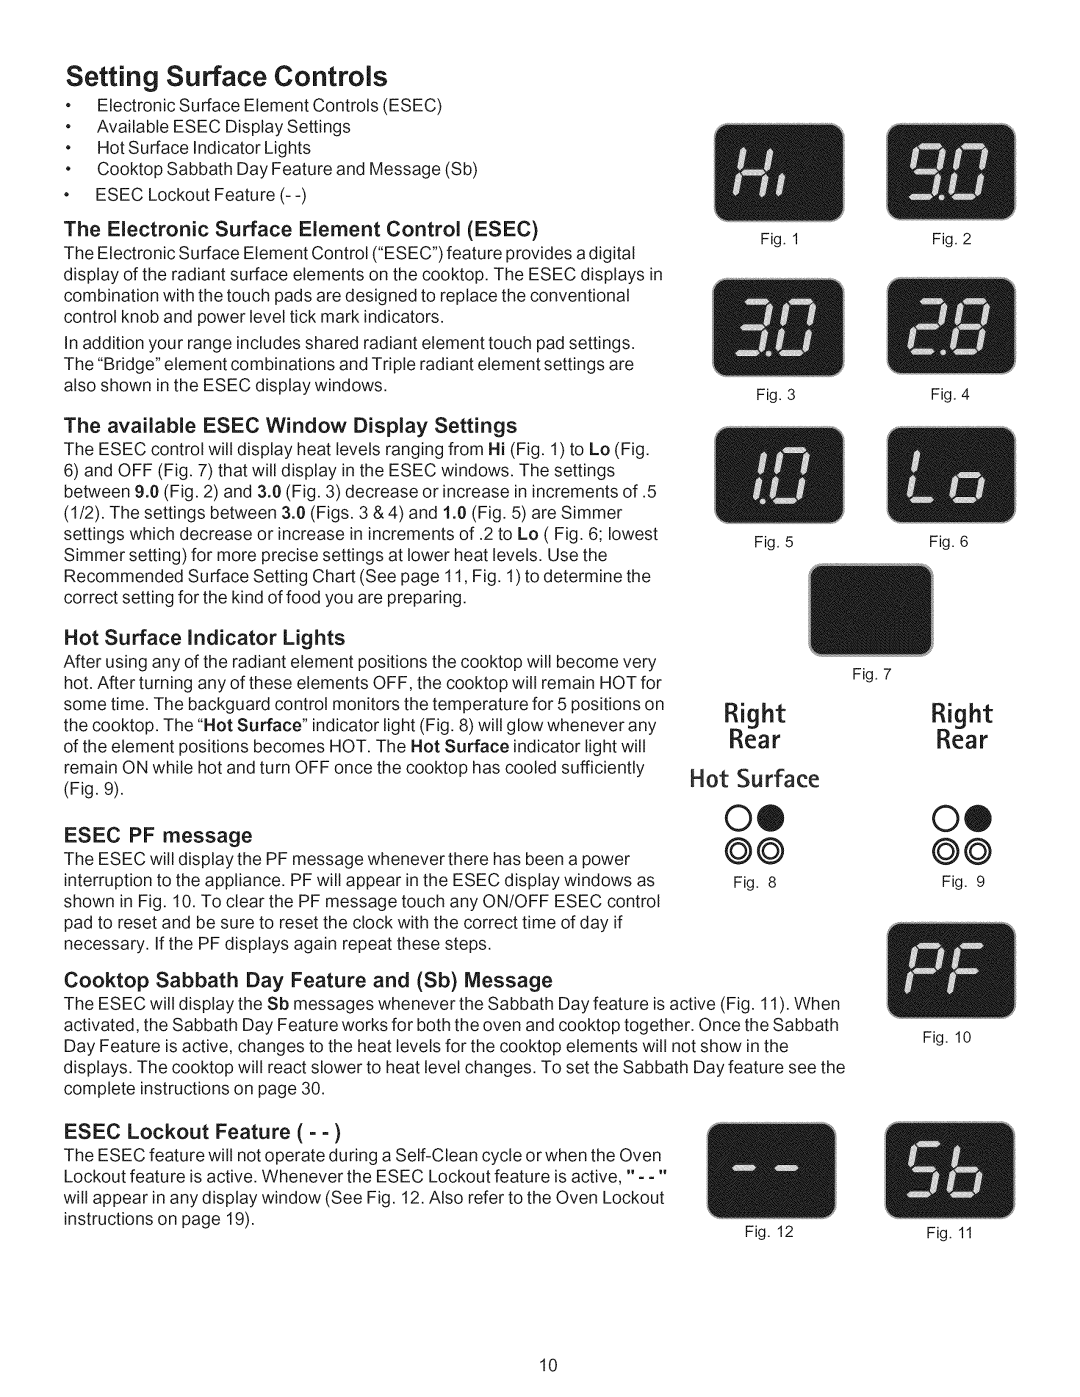 Kenmore 790.9662 manual Setting Surface Controls, RightRight, RearRear, The Electronic Surface Element Control ESEC 